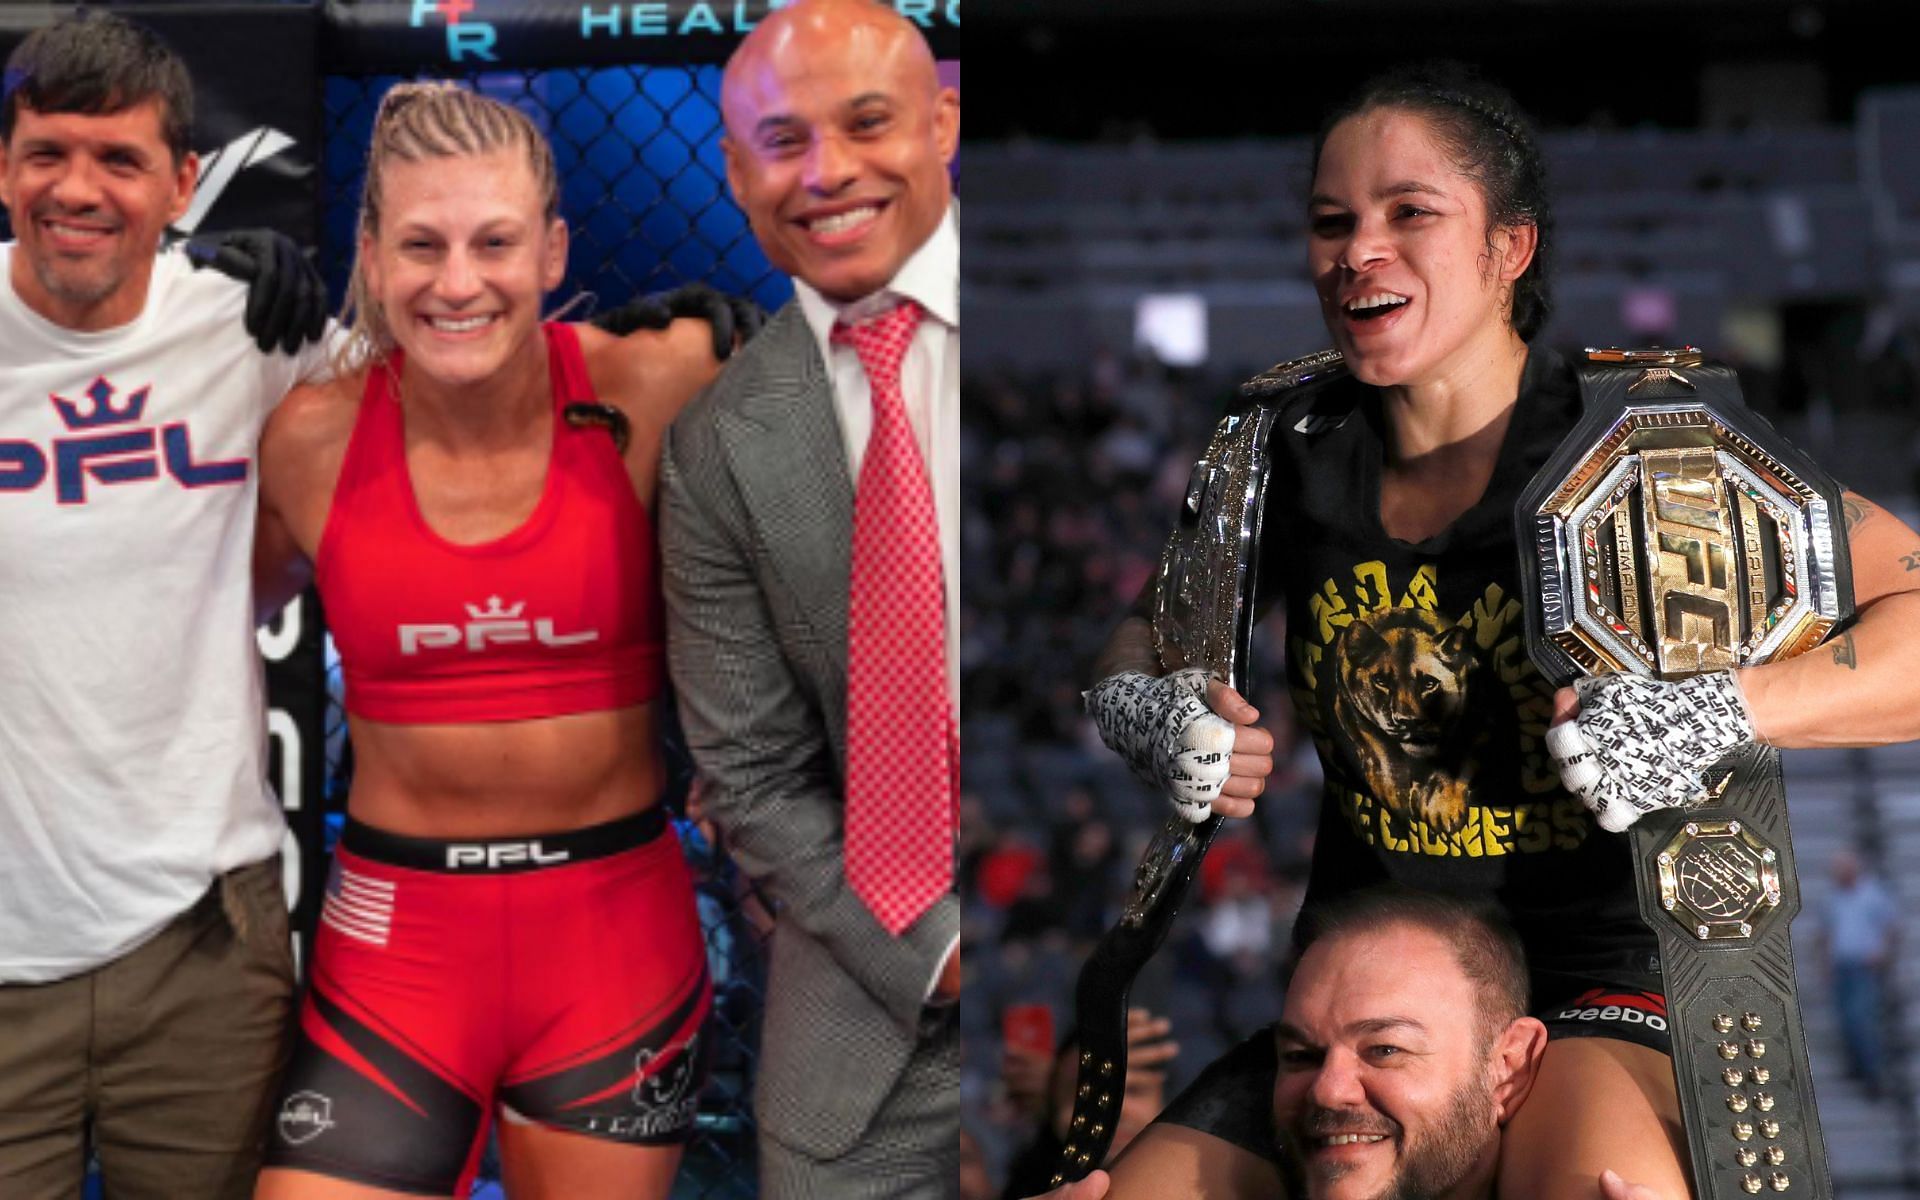 Kayla Harrison with her team (left; Image credit: @judokayla on Instagram) and Amanda Nunes being carried by her head coach (right)